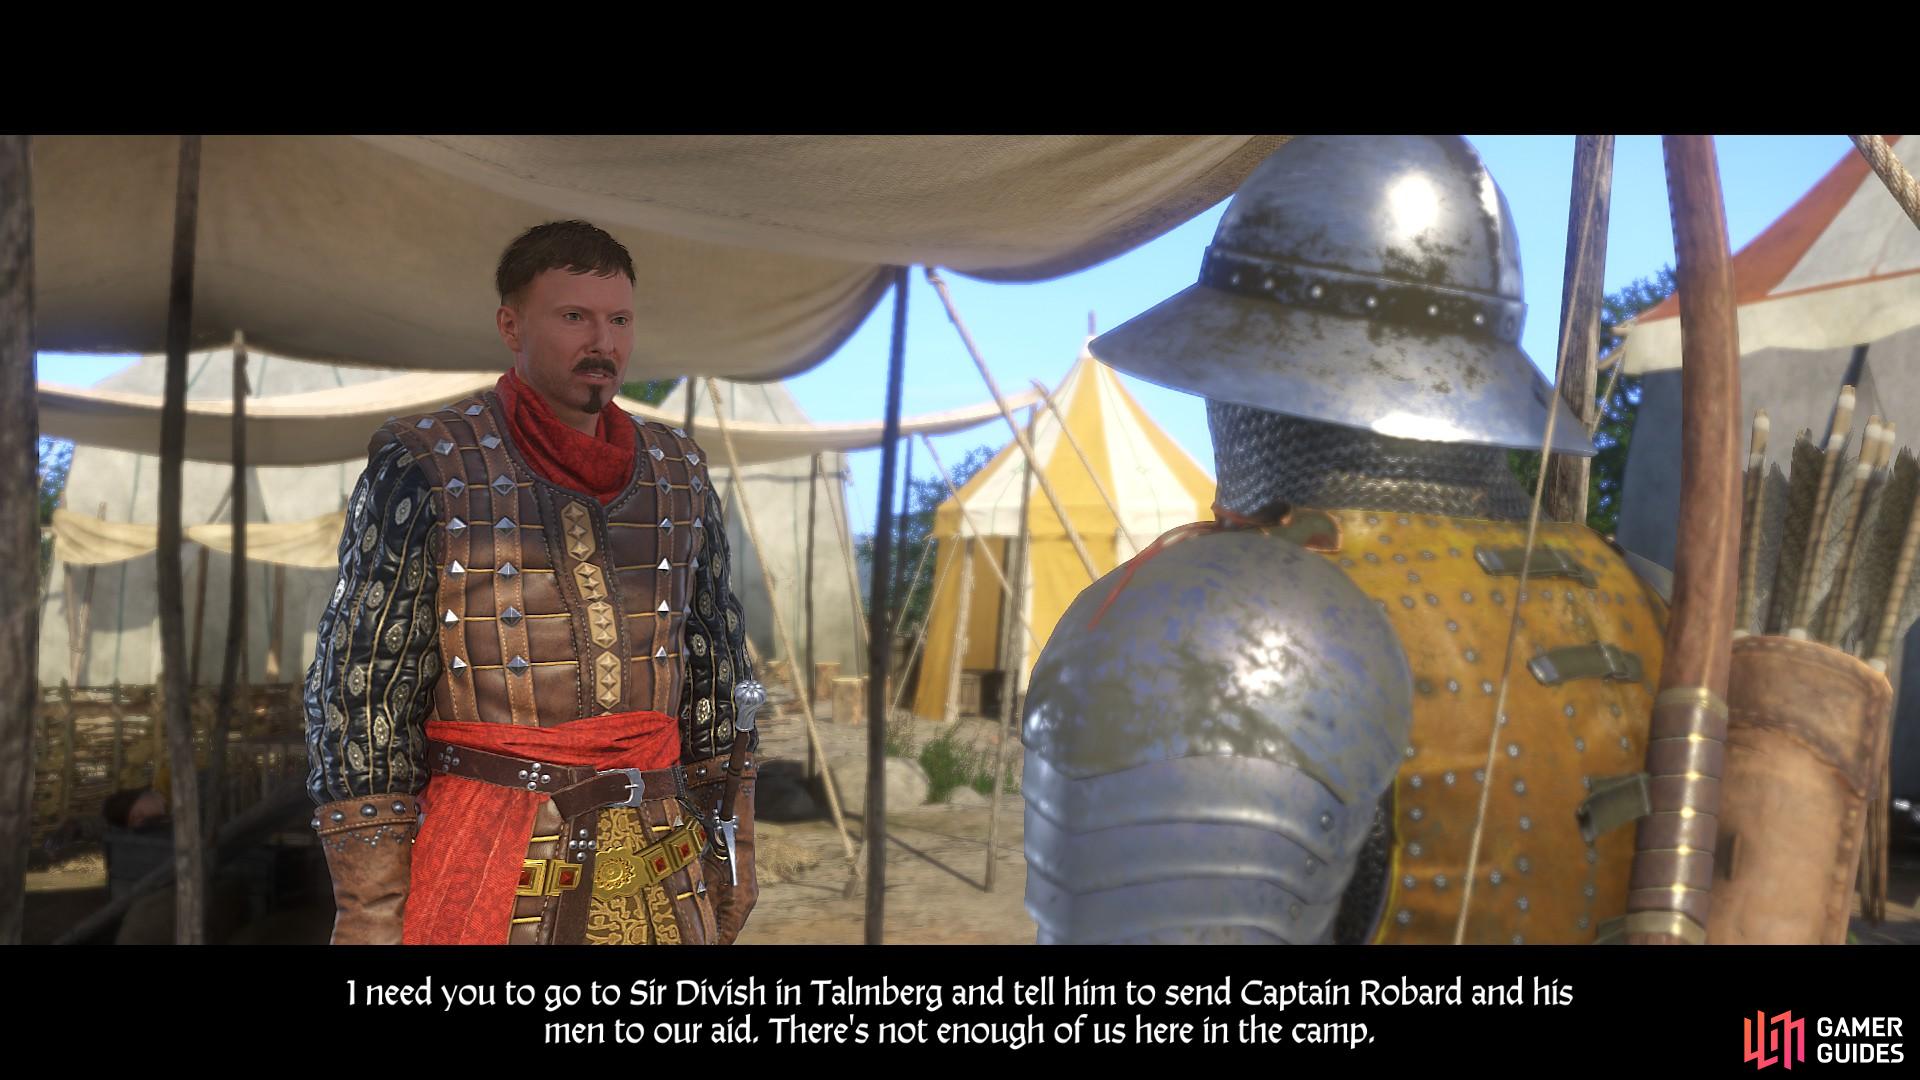 After informing Sir Radzig of the situation at Pribyslavitz, he will instruct you to request aid from Sir Divish at Talmberg.